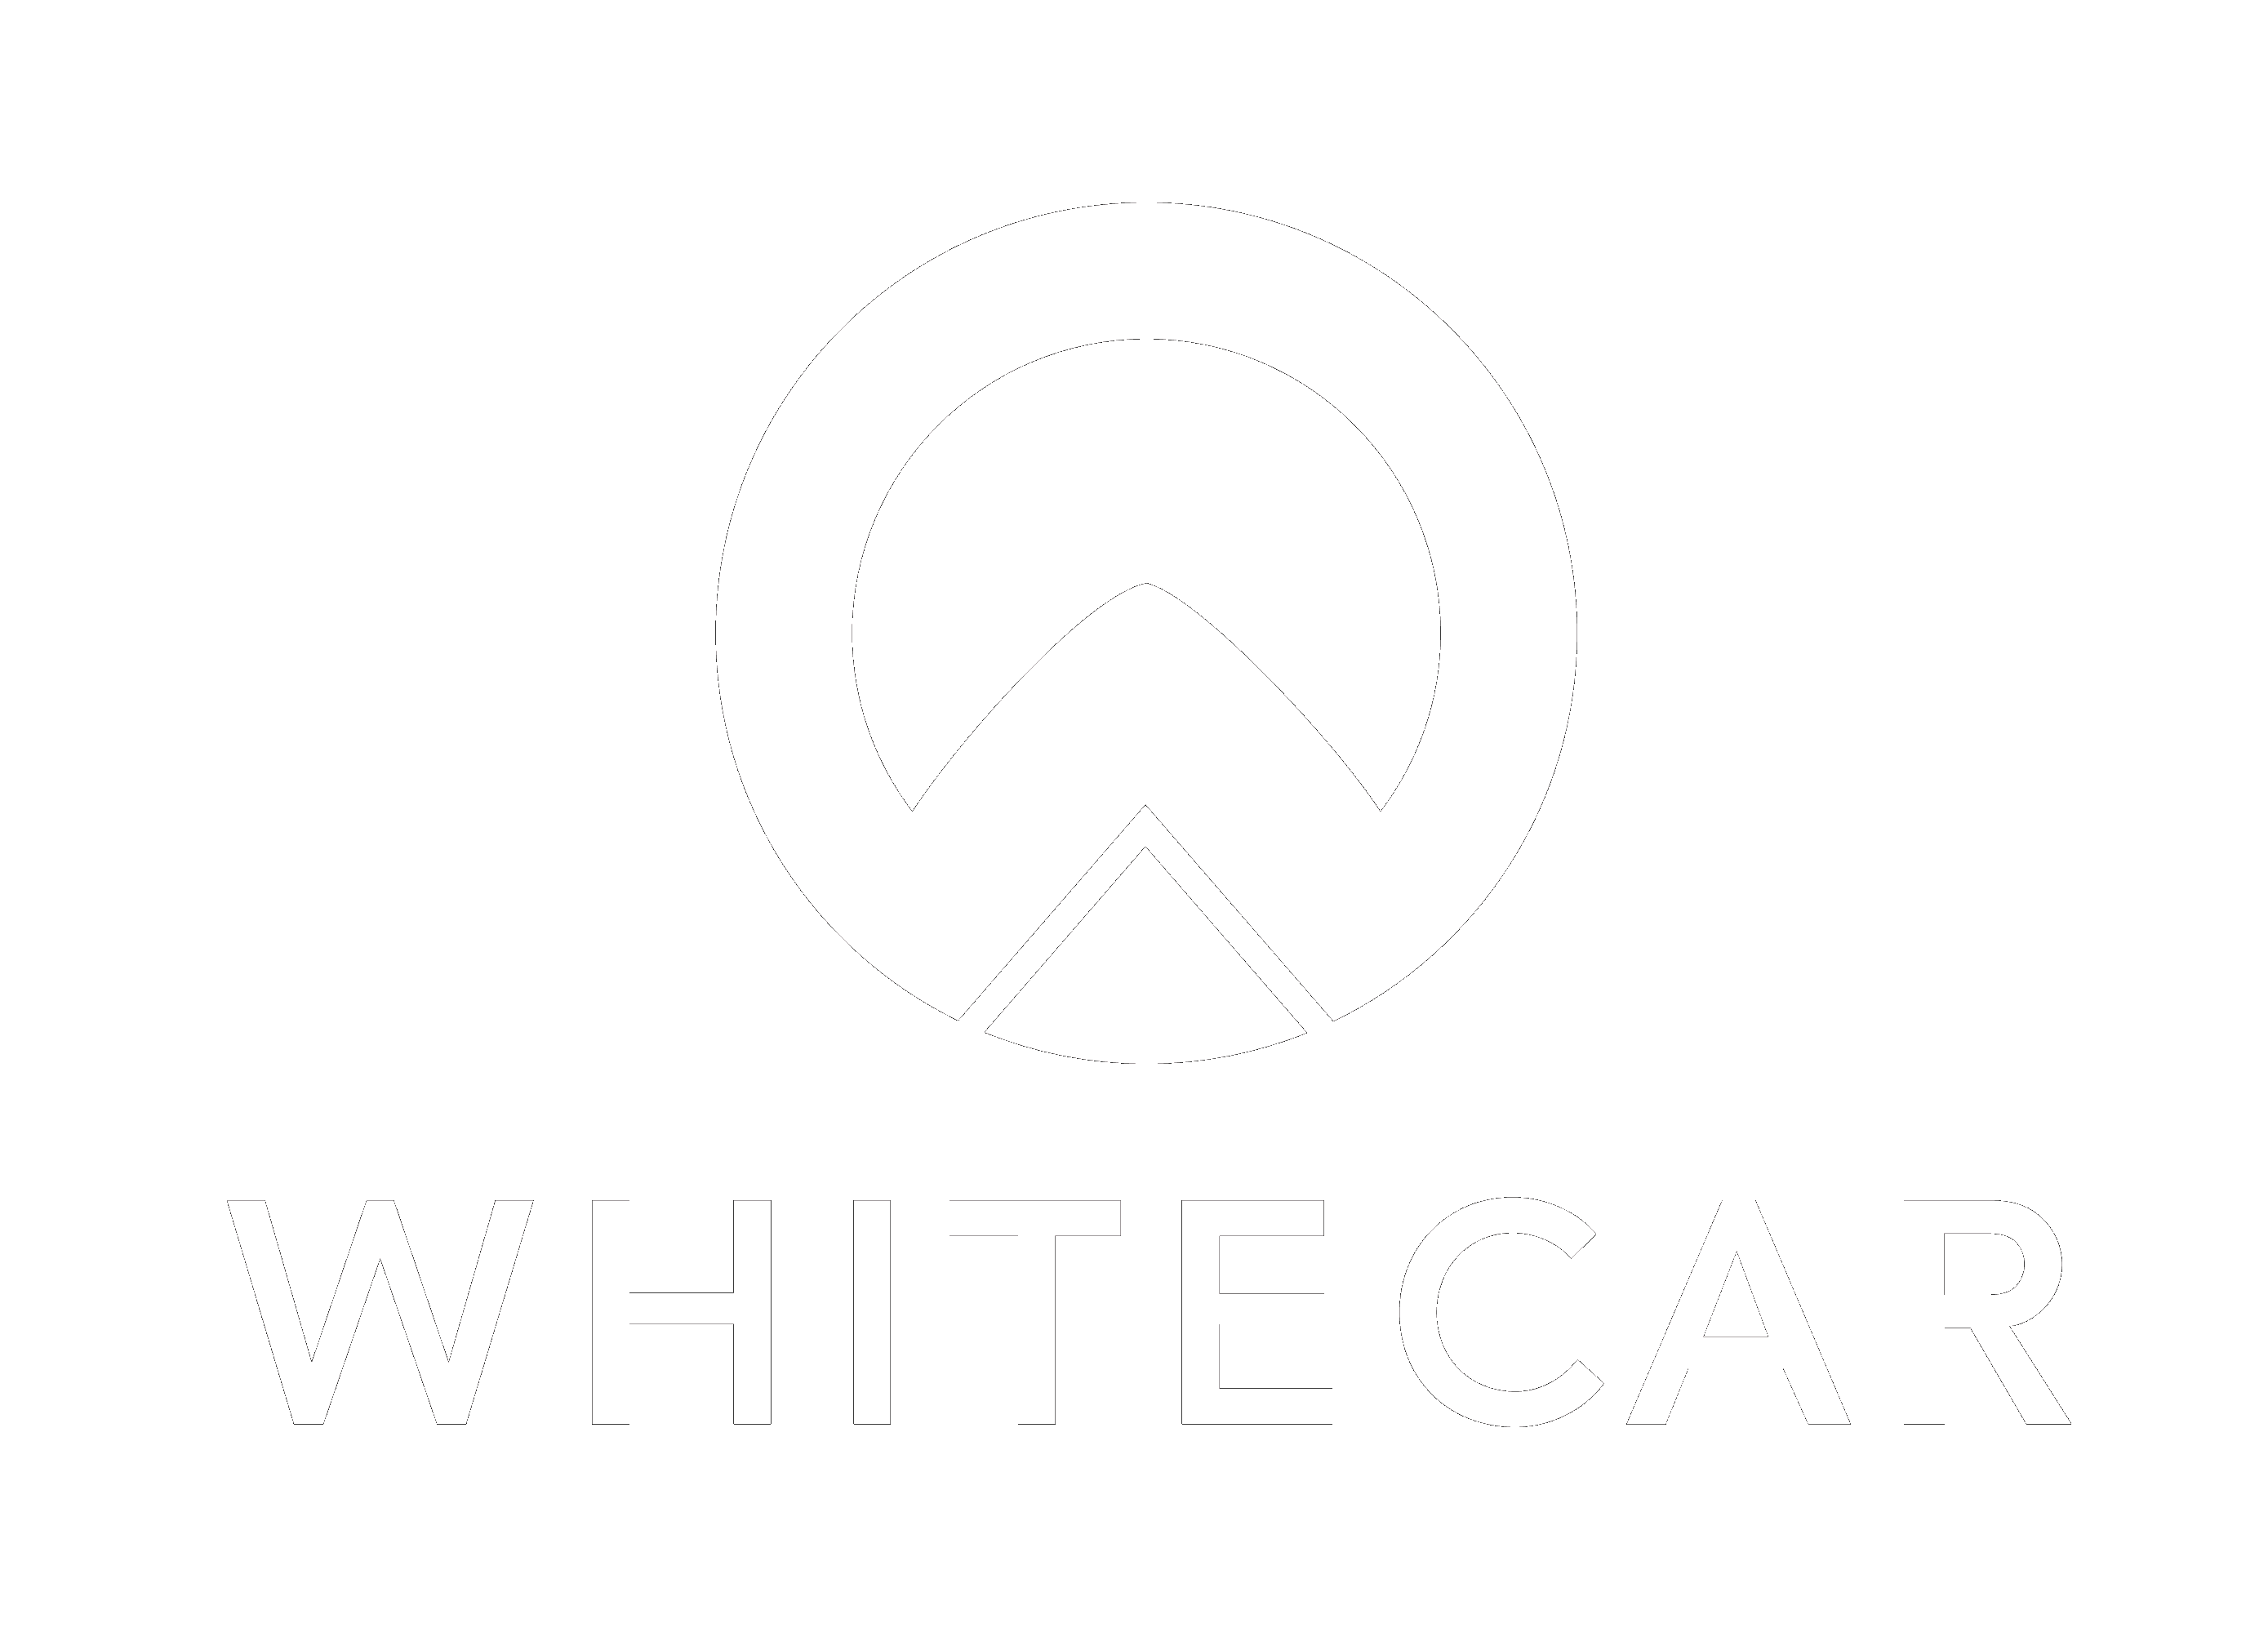 Black and White Car Logo - Hire a Tesla with Whitecar. Car rental across the UK